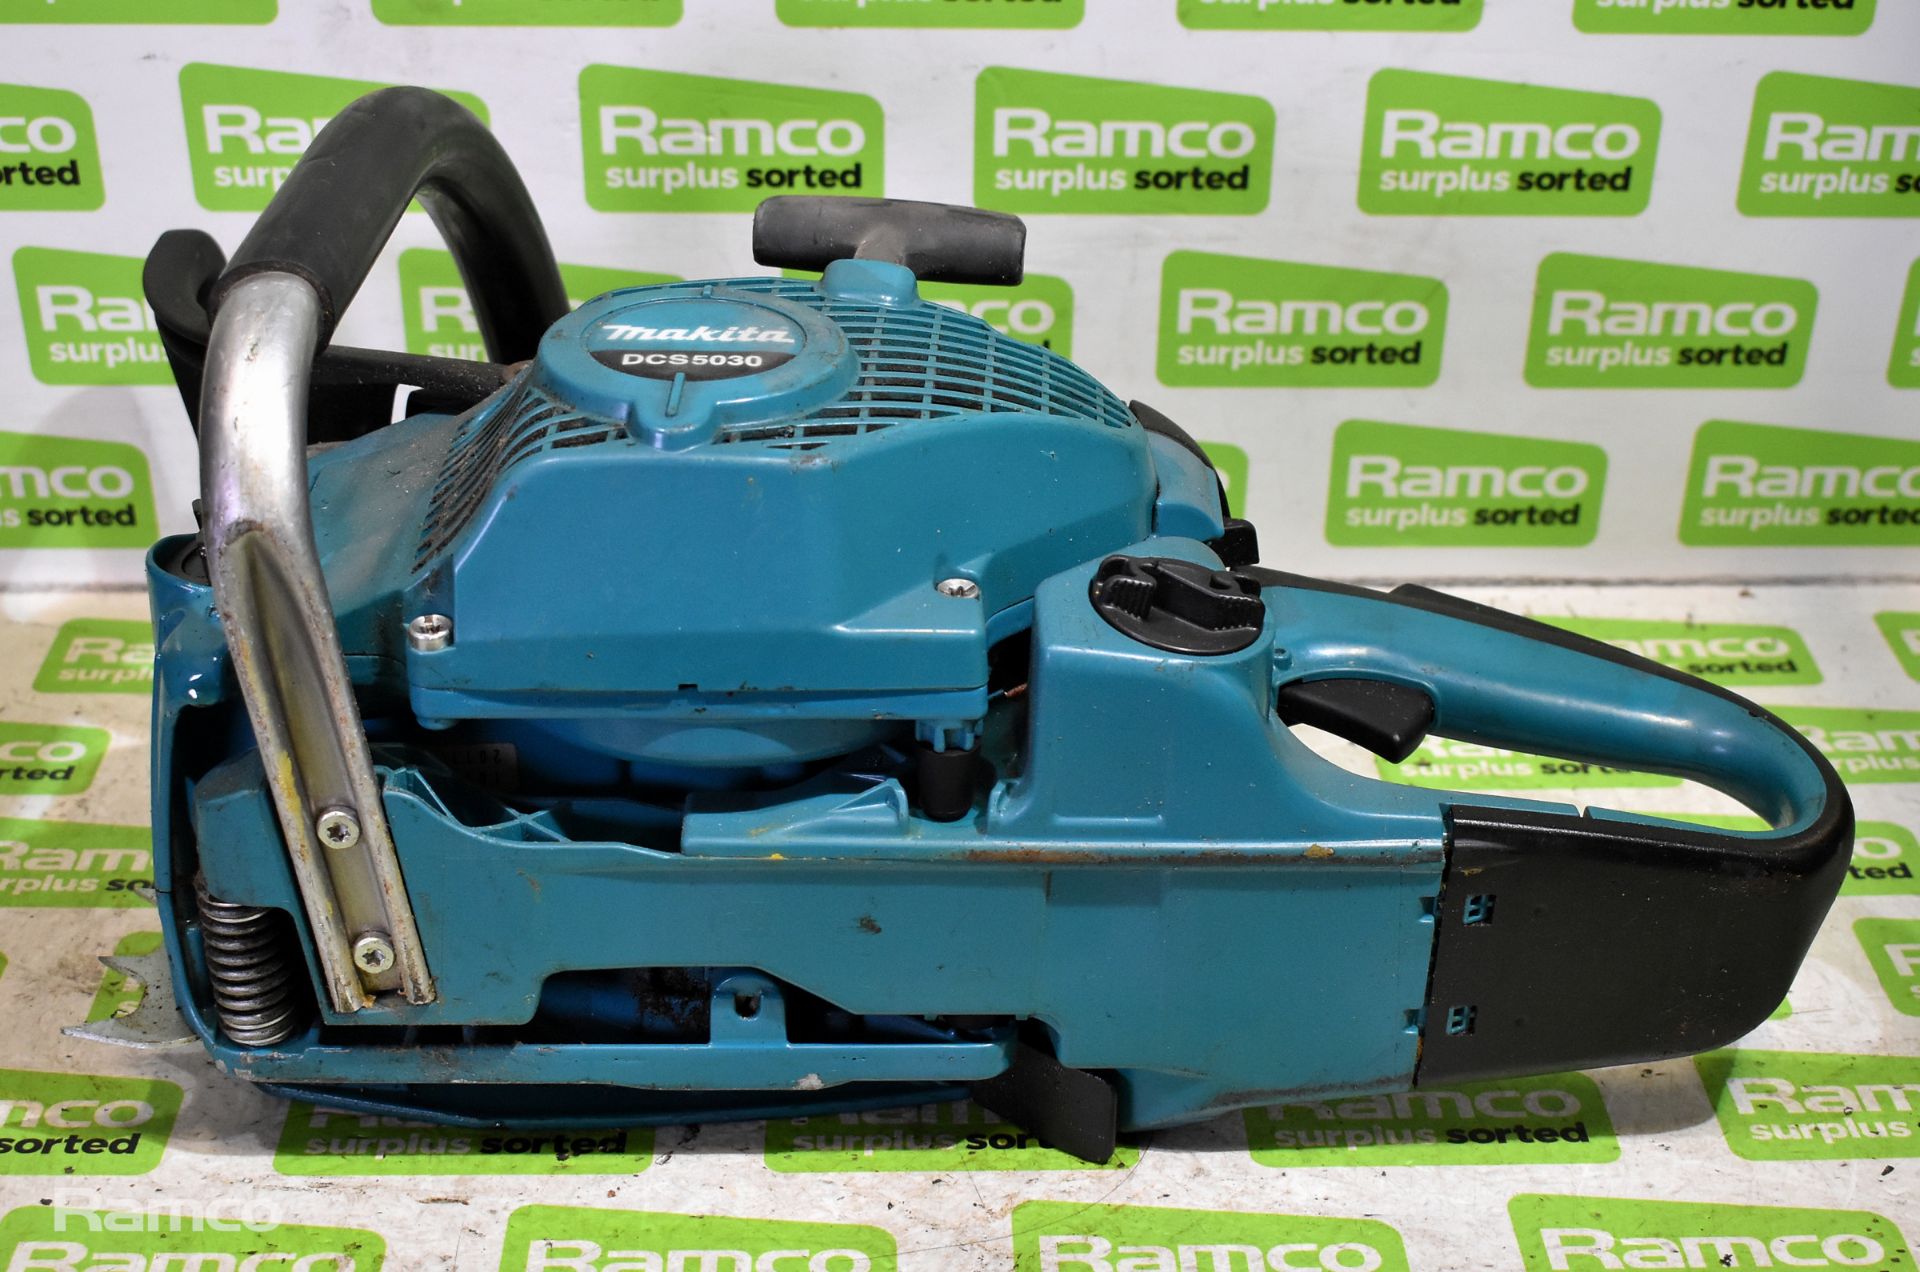 4x Makita DCS5030 50cc petrol chainsaws - BODIES ONLY - AS SPARES OR REPAIRS - Image 16 of 21